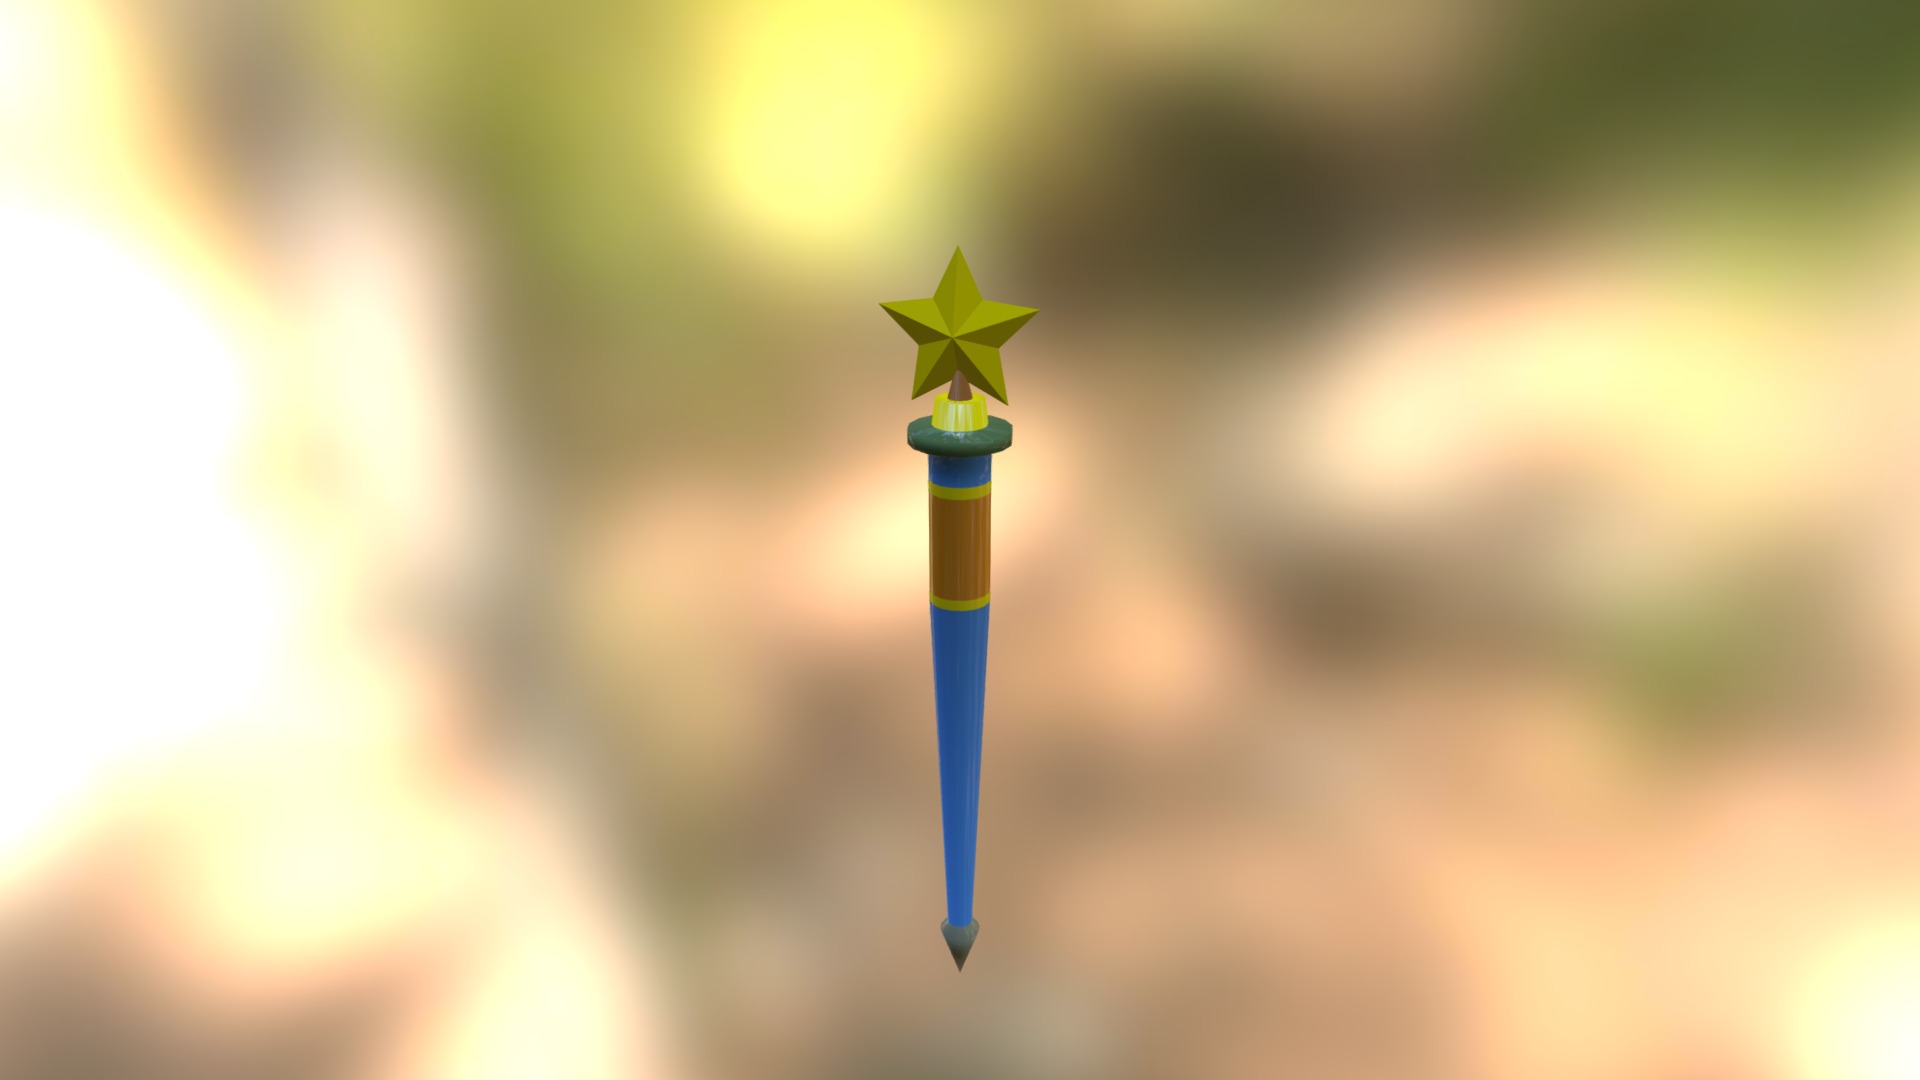 3D model Morning Star (Kingdom Hearts) - This is a 3D model of the Morning Star (Kingdom Hearts). The 3D model is about a blue and yellow pencil.